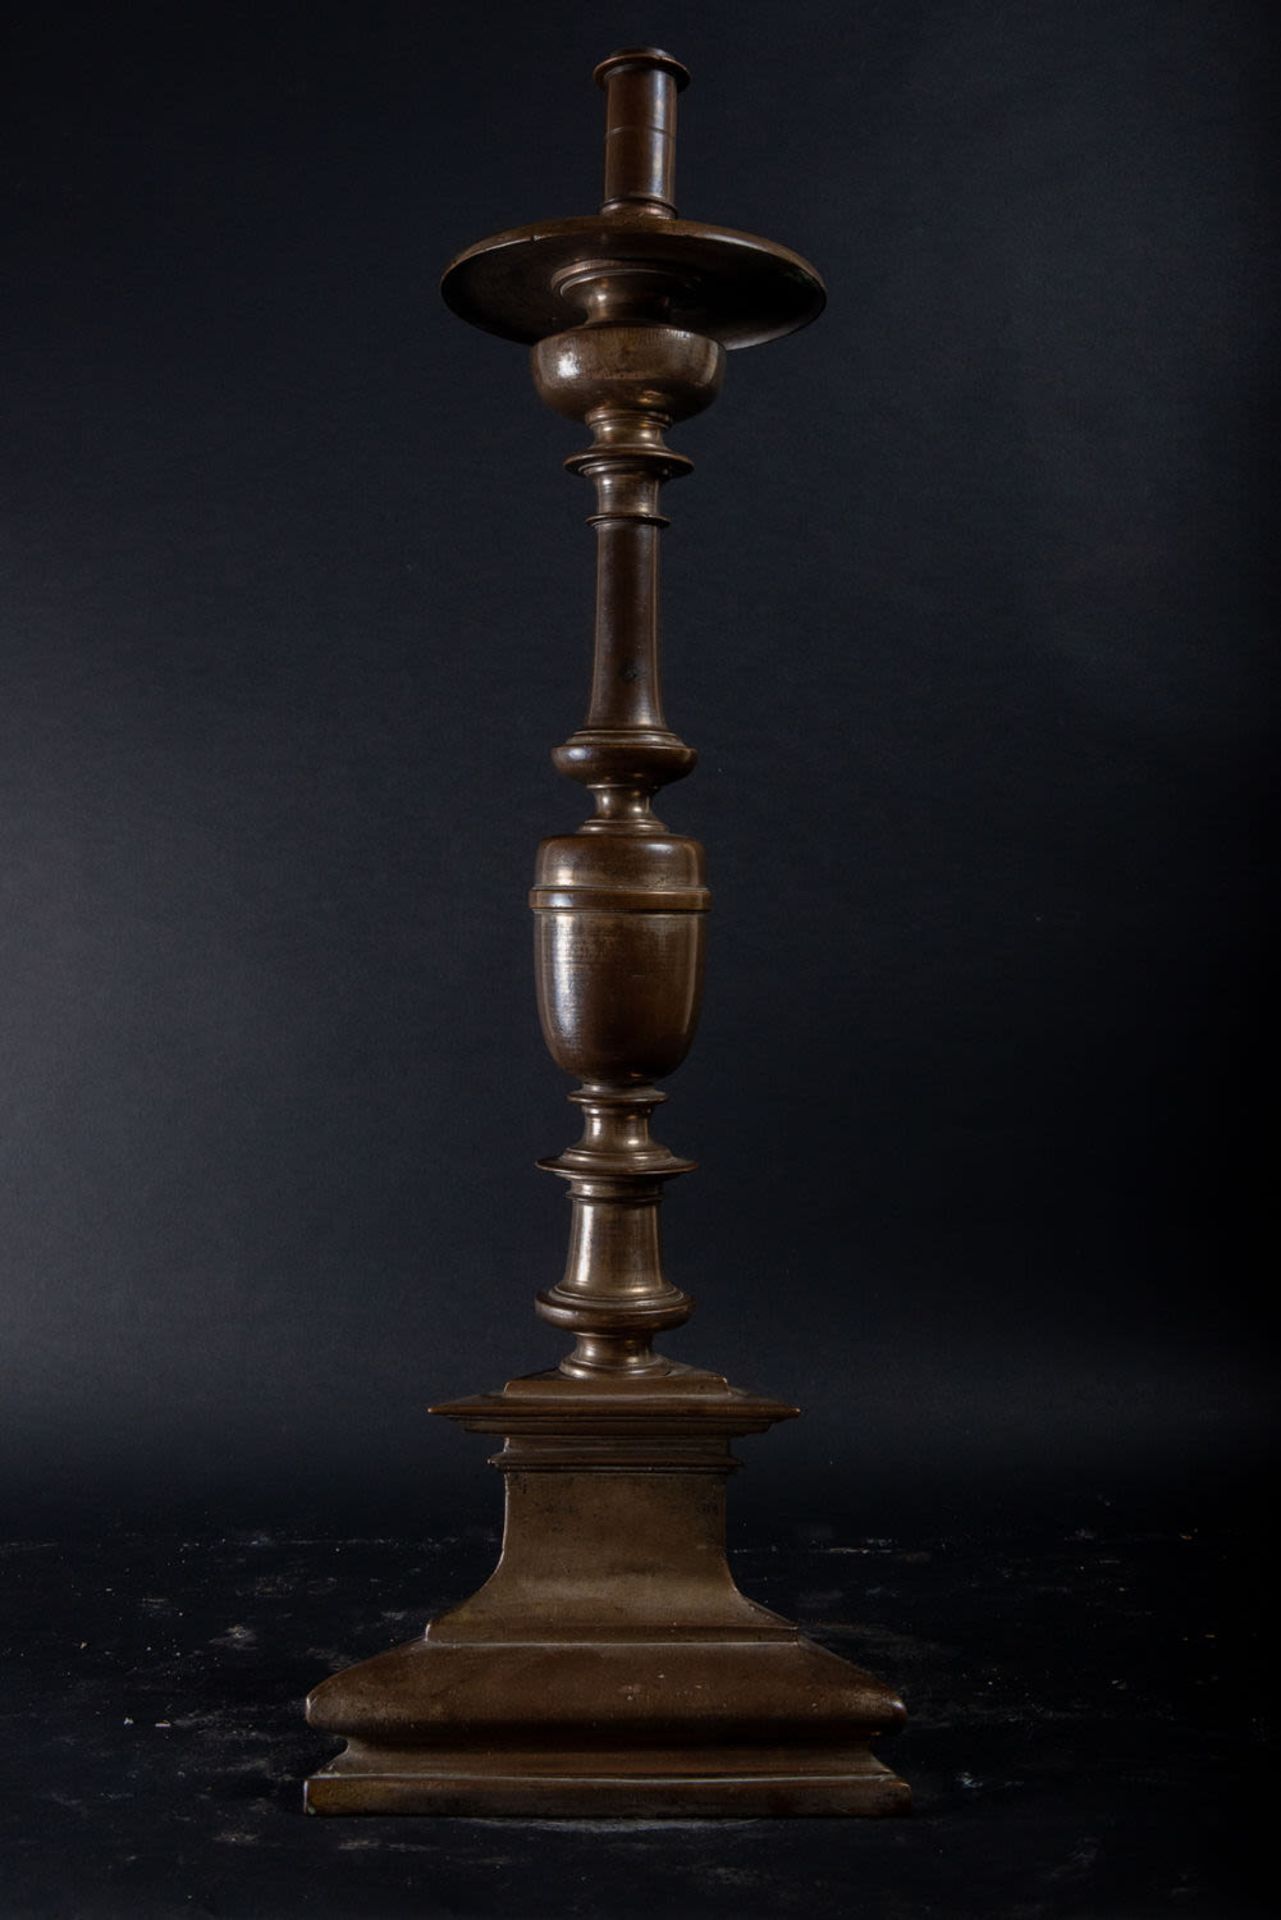 Important Pair of Bronze Plateresque Candelabra, Valladolid, Spain, 16th century - Image 5 of 5